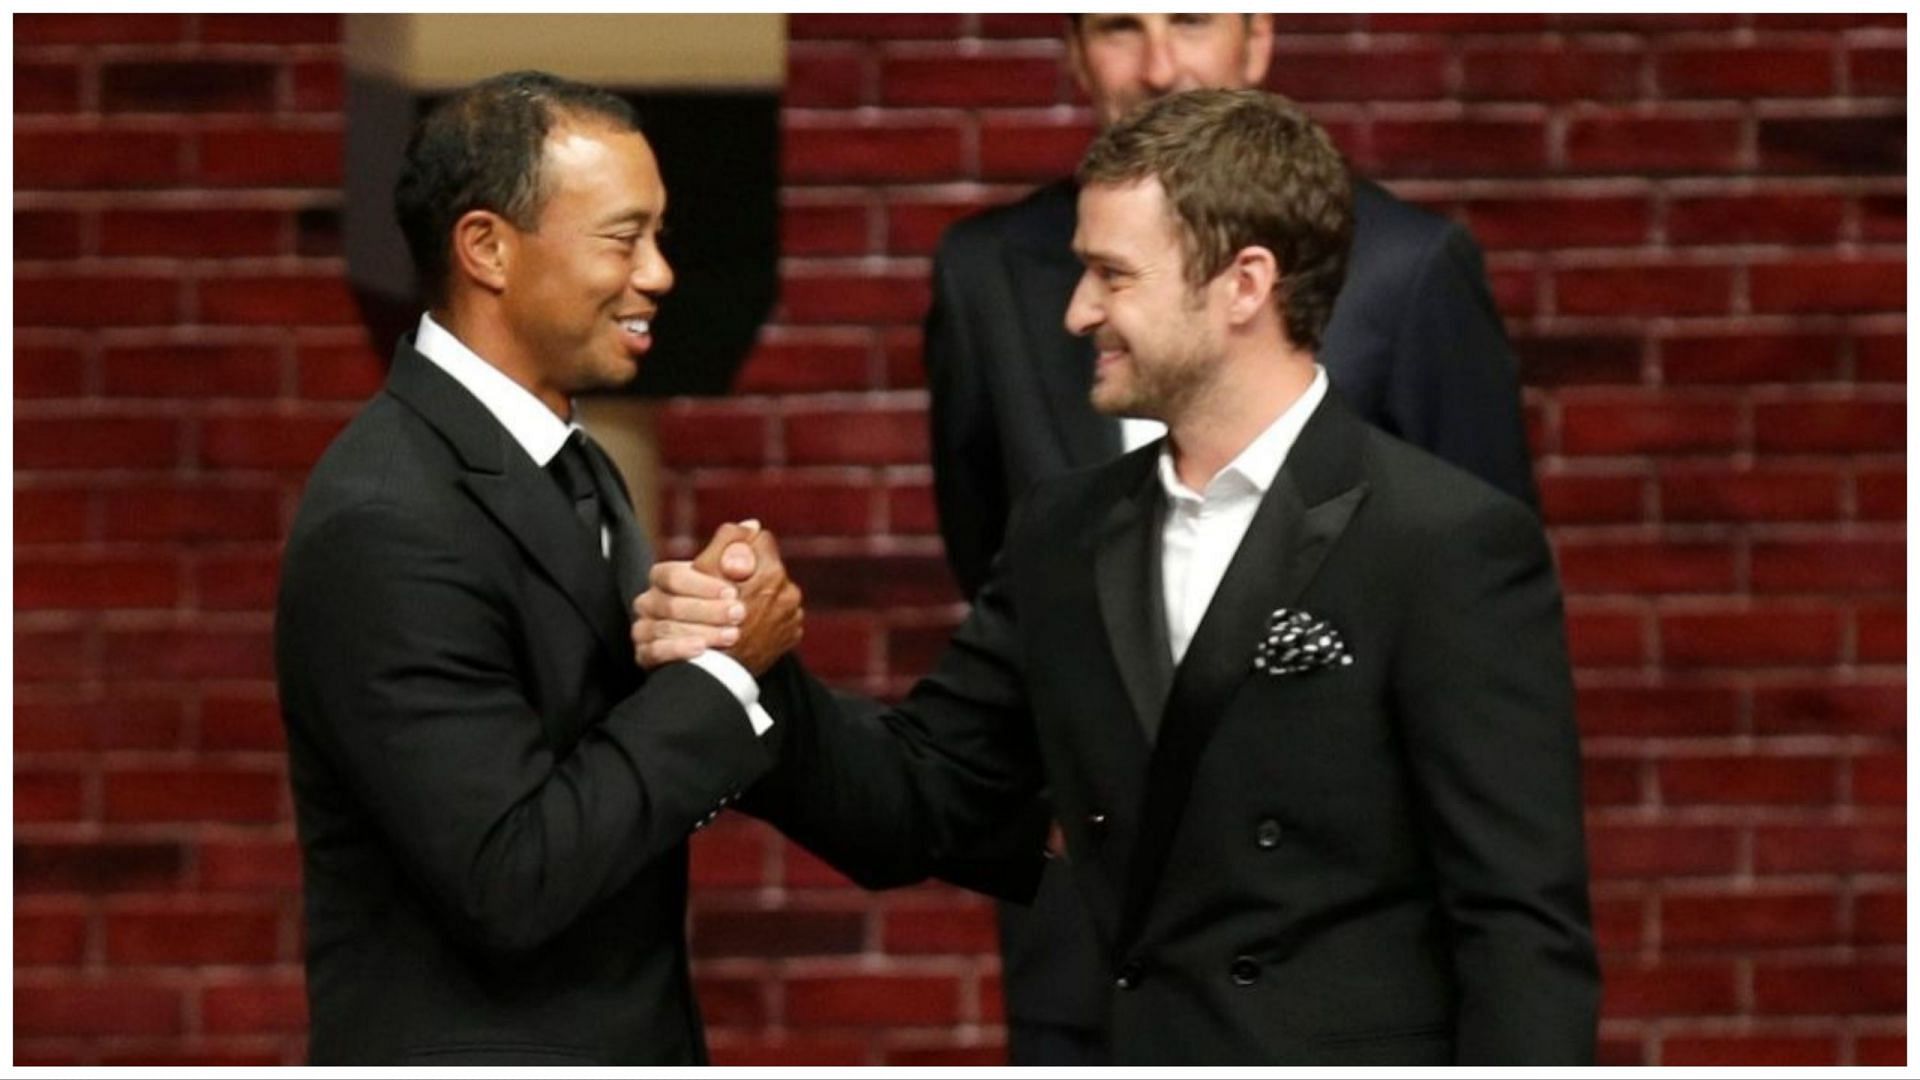 Tiger Woods and Justin Timberlake open the sports themed bar in New York City (Image via Getty)